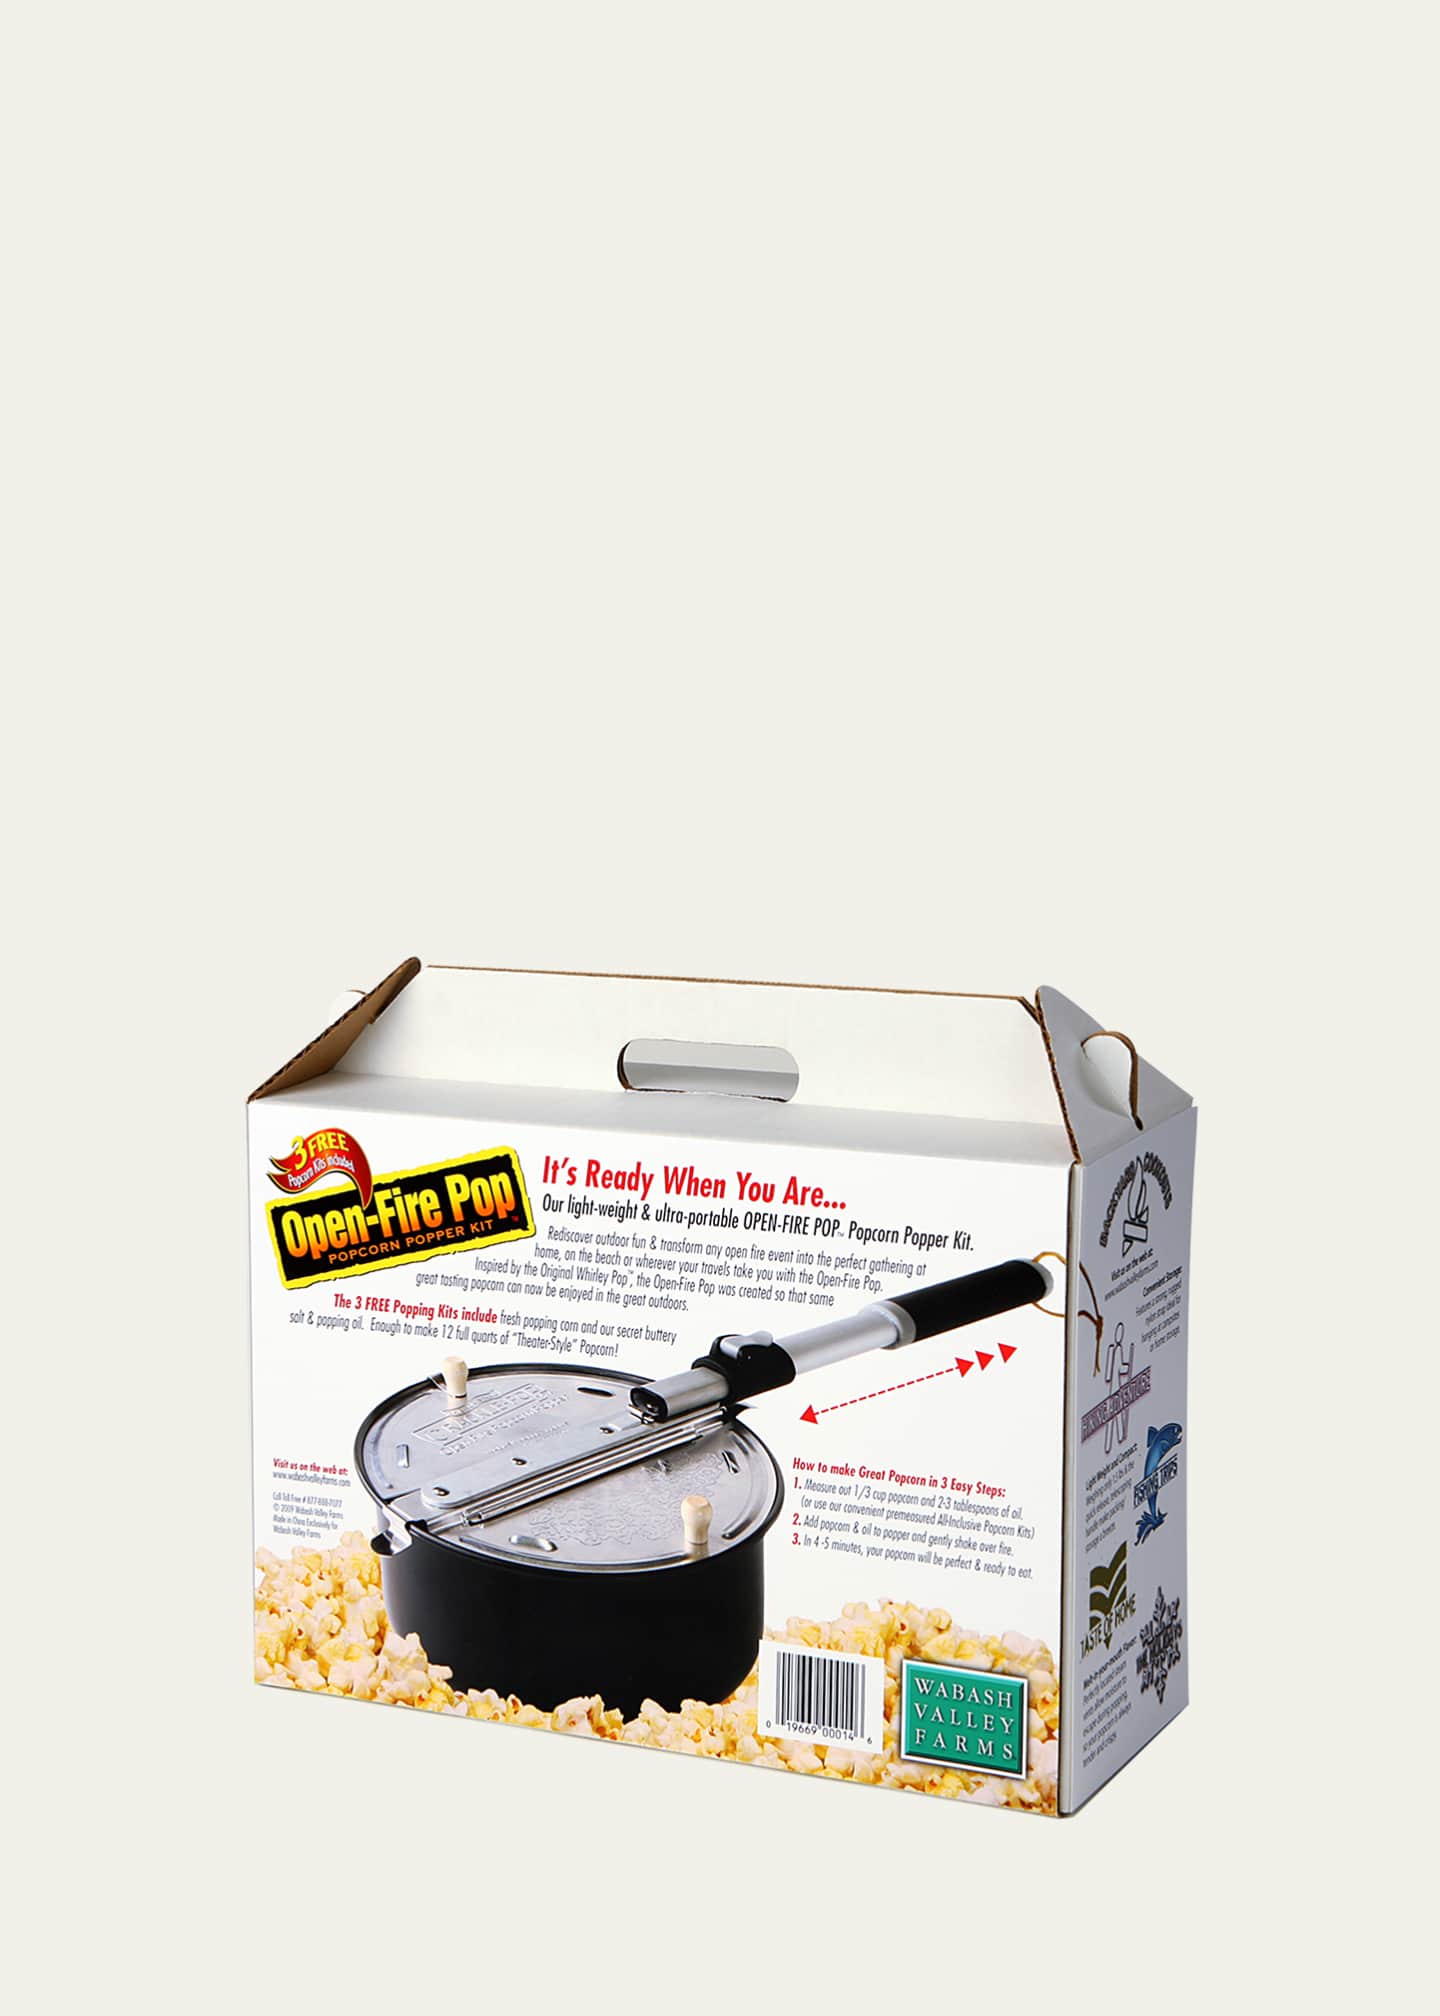 Wabash Valley Farms - The Original Whirley Pop Stovetop Popcorn Popper -  Town Wharf General Store